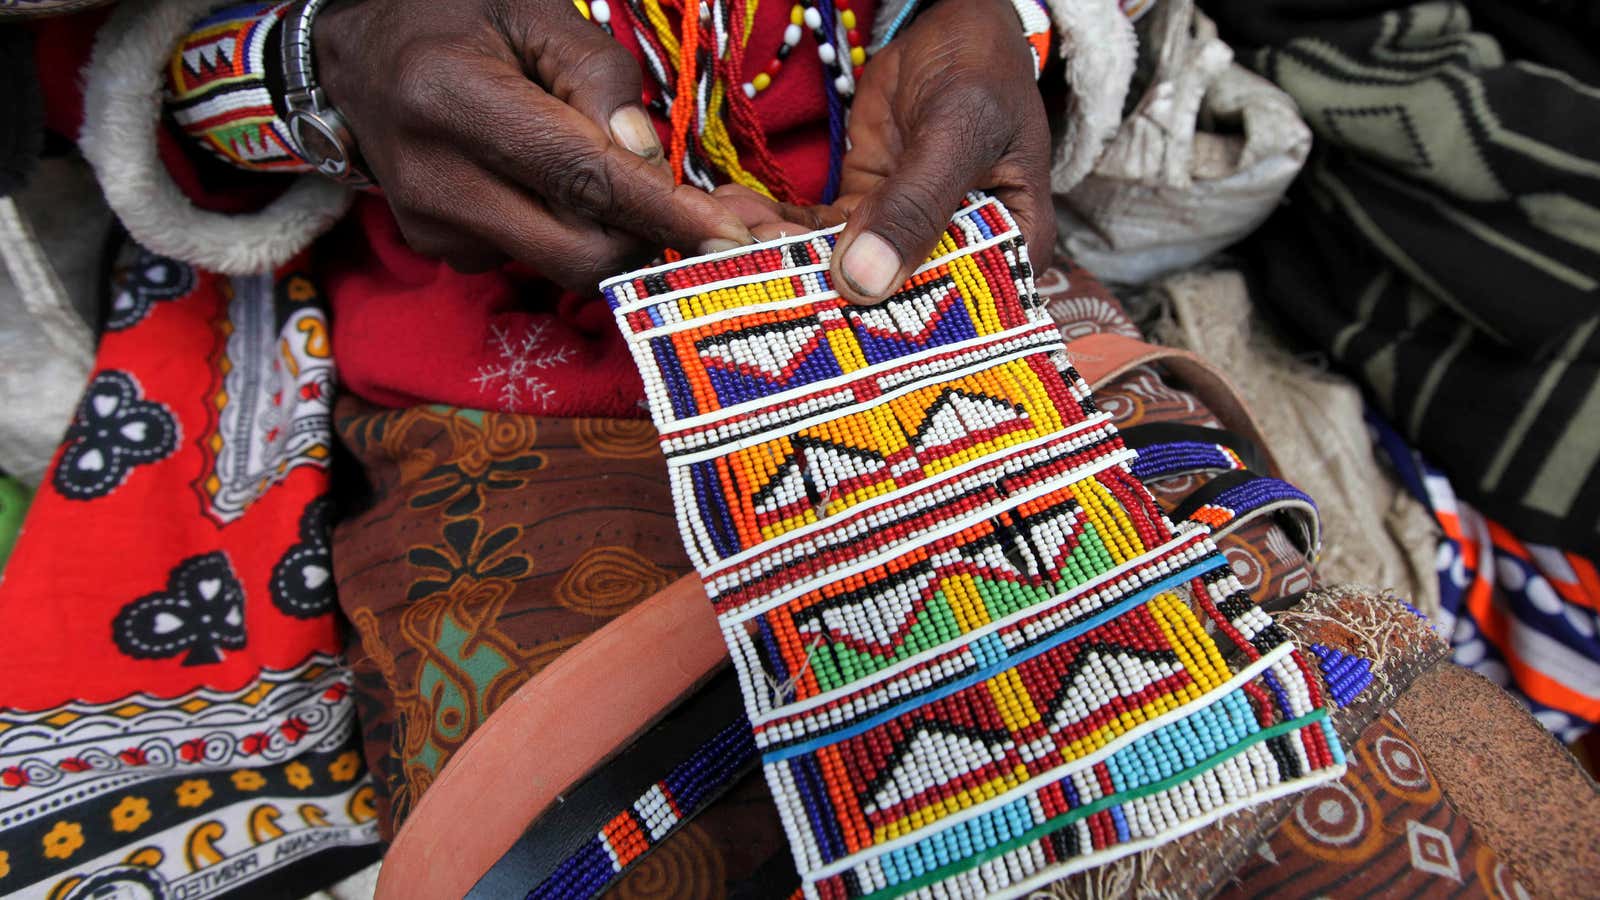 Louis Vuitton collaborates with Mexican artisans after Raw Edges plagiarism  scandal